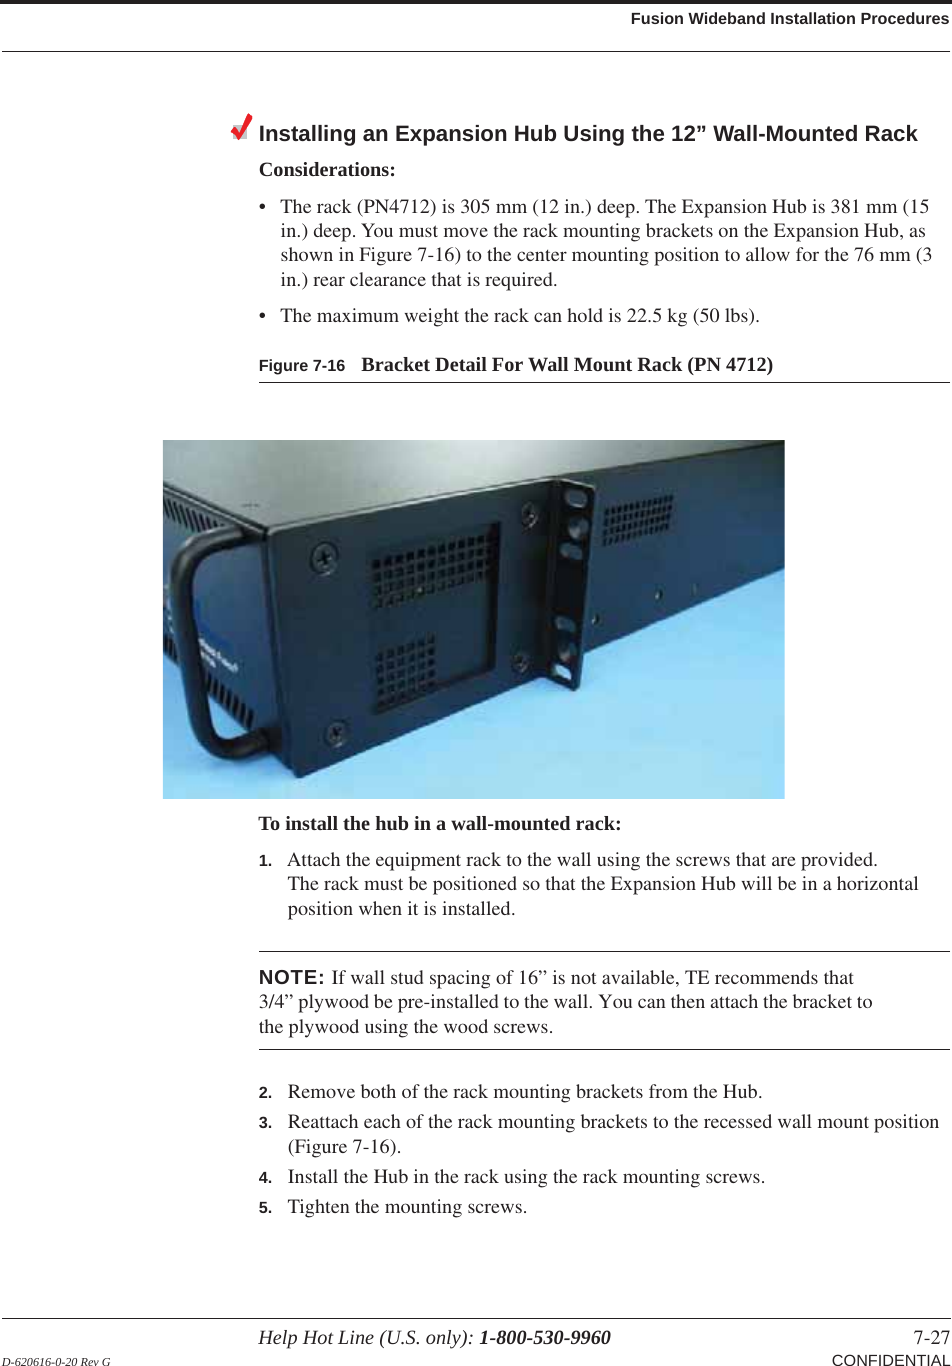 Help Hot Line (U.S. only): 1-800-530-9960 7-27 D-620616-0-20 Rev G CONFIDENTIALFusion Wideband Installation ProceduresInstalling an Expansion Hub Using the 12” Wall-Mounted RackConsiderations:• The rack (PN4712) is 305 mm (12 in.) deep. The Expansion Hub is 381 mm (15 in.) deep. You must move the rack mounting brackets on the Expansion Hub, as shown in Figure  7-16) to the center mounting position to allow for the 76 mm (3 in.) rear clearance that is required.• The maximum weight the rack can hold is 22.5 kg (50 lbs).Figure 7-16 Bracket Detail For Wall Mount Rack (PN 4712)To install the hub in a wall-mounted rack:1. Attach the equipment rack to the wall using the screws that are provided.The rack must be positioned so that the Expansion Hub will be in a horizontal position when it is installed.NOTE: If wall stud spacing of 16” is not available, TE recommends that 3/4” plywood be pre-installed to the wall. You can then attach the bracket to the plywood using the wood screws.2. Remove both of the rack mounting brackets from the Hub.3. Reattach each of the rack mounting brackets to the recessed wall mount position (Figure 7-16).4. Install the Hub in the rack using the rack mounting screws.5. Tighten the mounting screws.